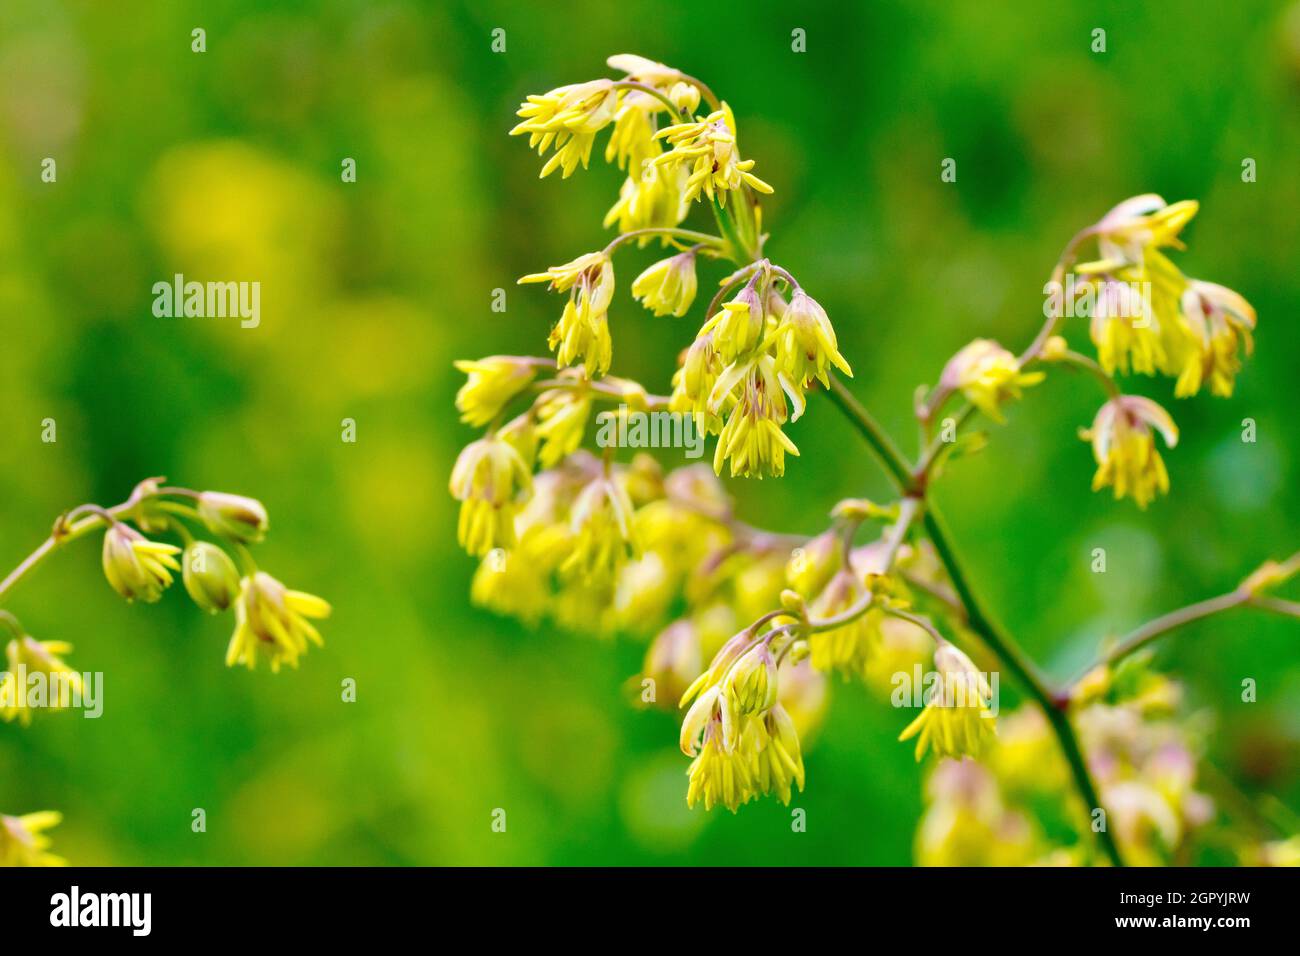 Lesser Meadow-rue (thalictrum minus), close up showing a stem of the coastal growing plant covered in tiny delicate yellow flowers. Stock Photo